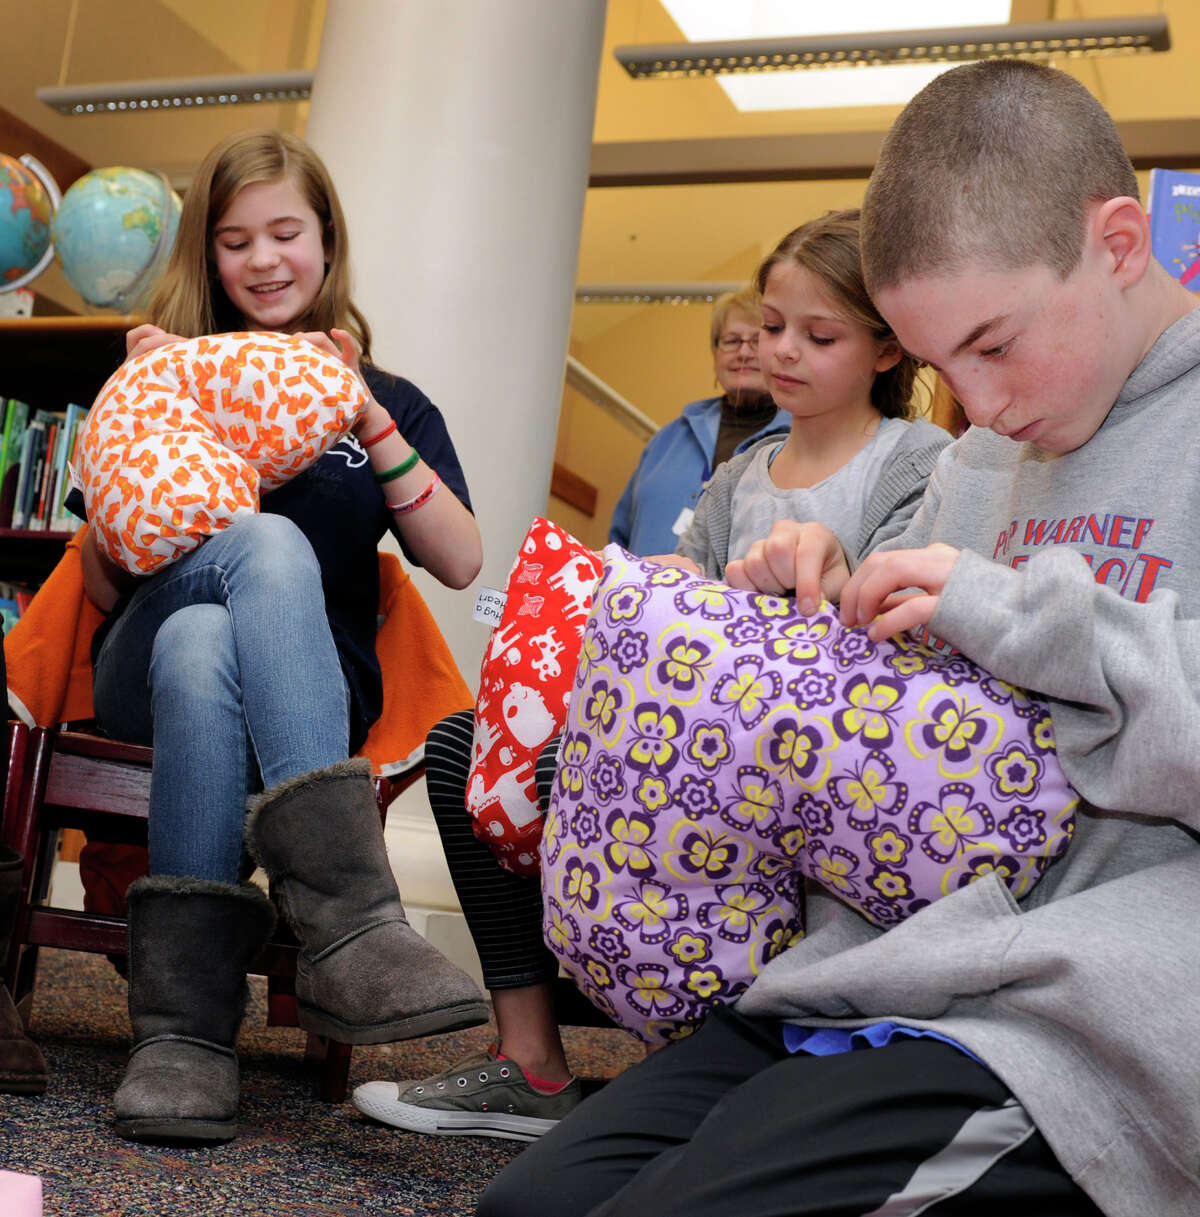 From left, Amelia Moschitta, Ryan Berlinger and Will Enright, all 11-year-old sixth-graders, do the final sewing on pillows that will be given to young cancer patients at Columbia Prebyterian Hospital in New York. This is the second annual "Matthew's Hearts of Hope 'Hug a Heart' Pillow Project" at the Sherman School, and the goal is 300 pillows. The project was started by Marie Hatcher, whose son Matthew was born with a congenital heart defect.